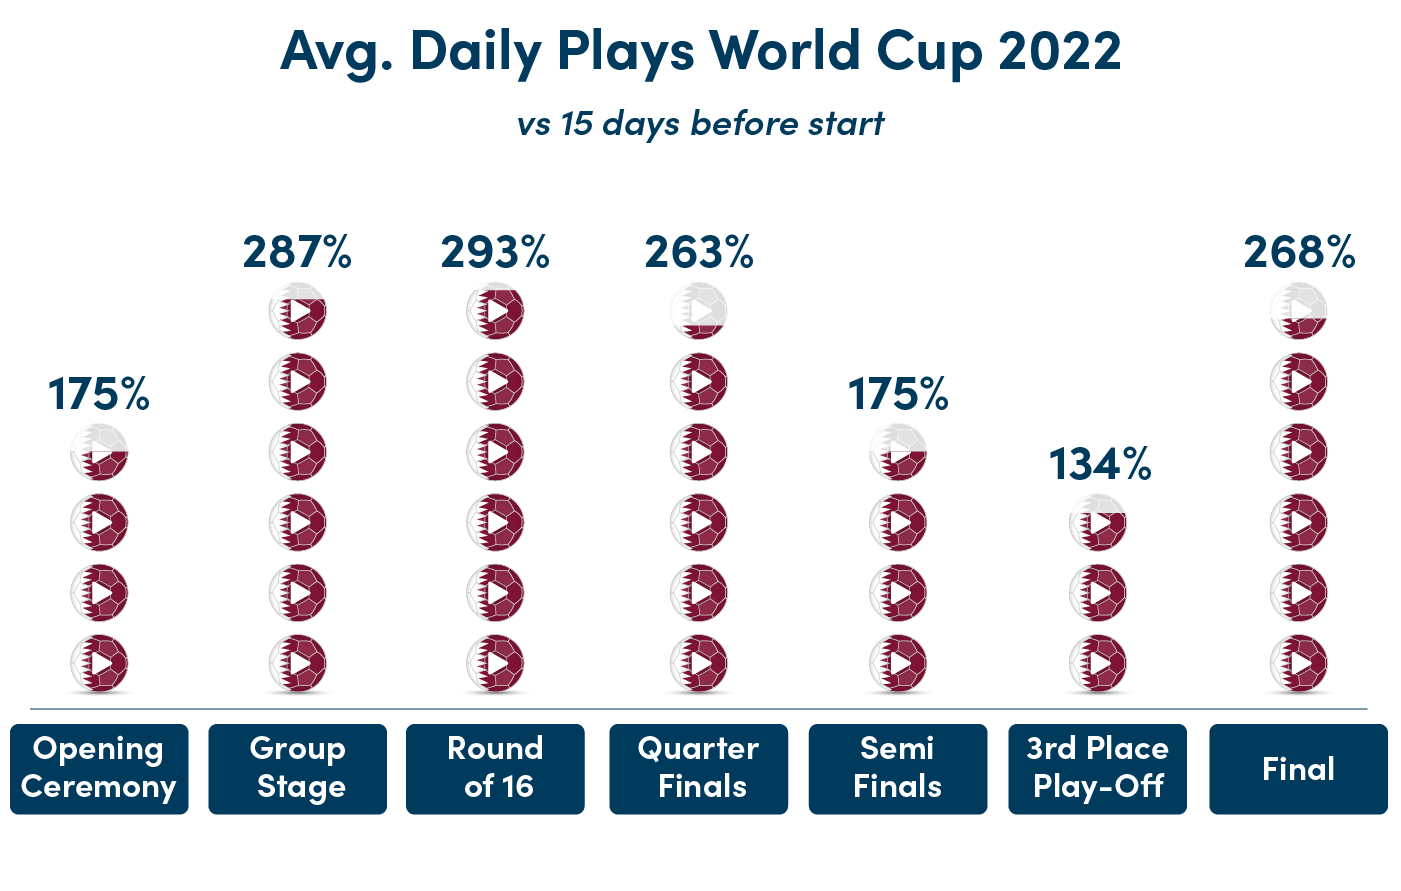 Evolution of average daily plays during the World Cup 2022 compared with the 15 days before the tournament